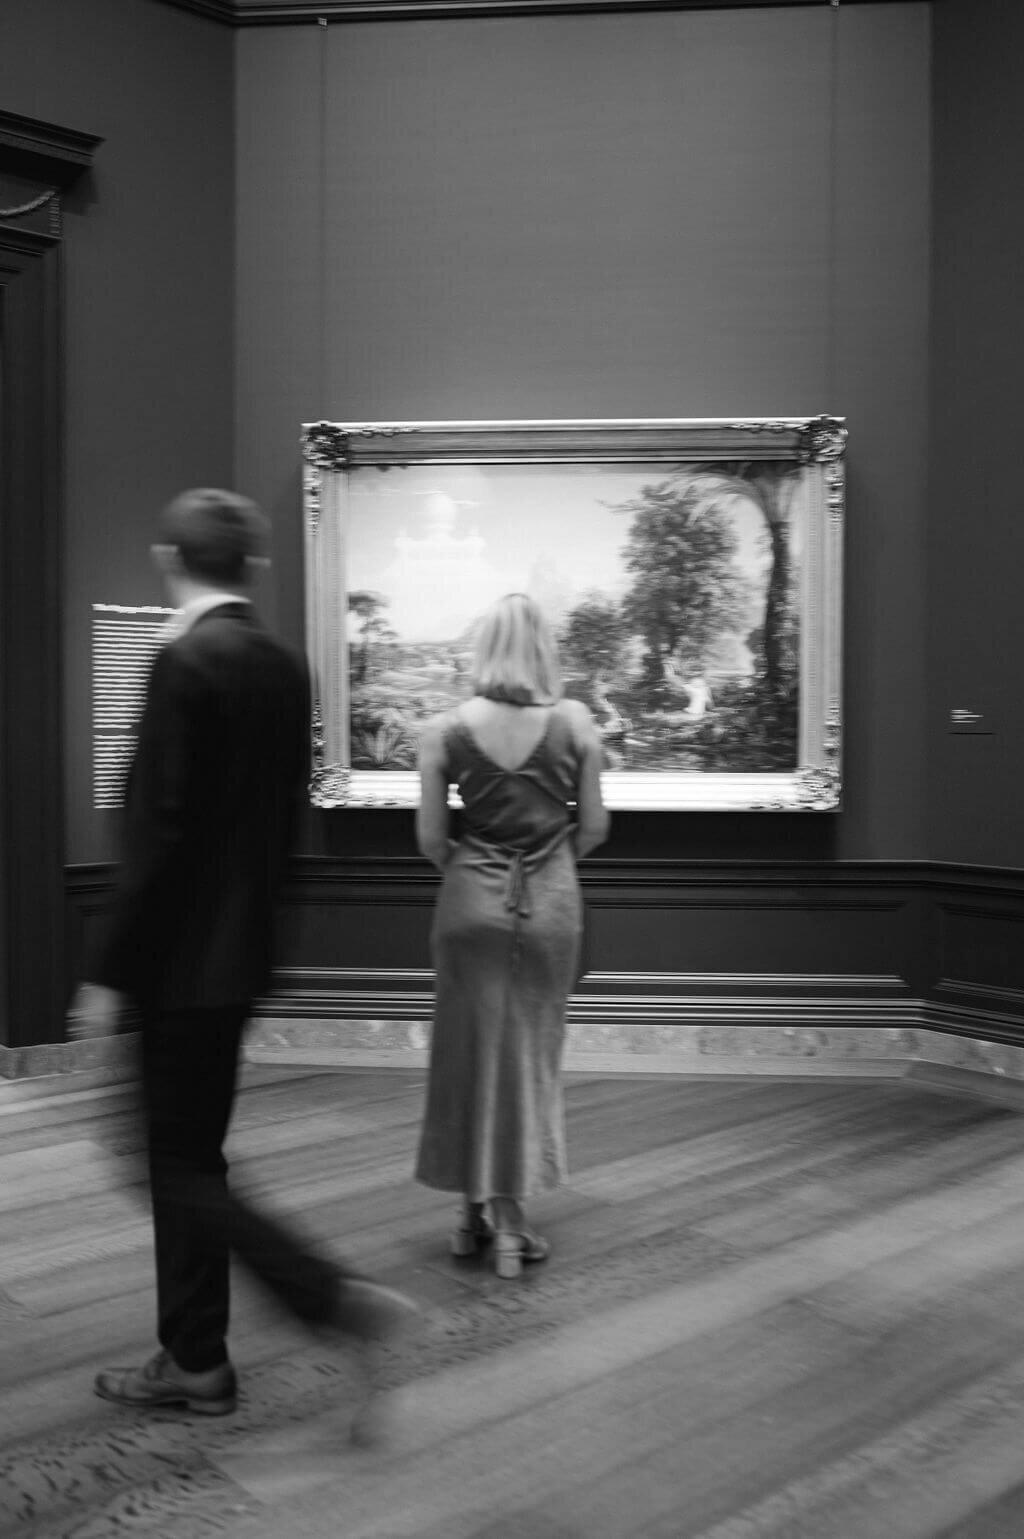 Motion blur image of a couple in a museum